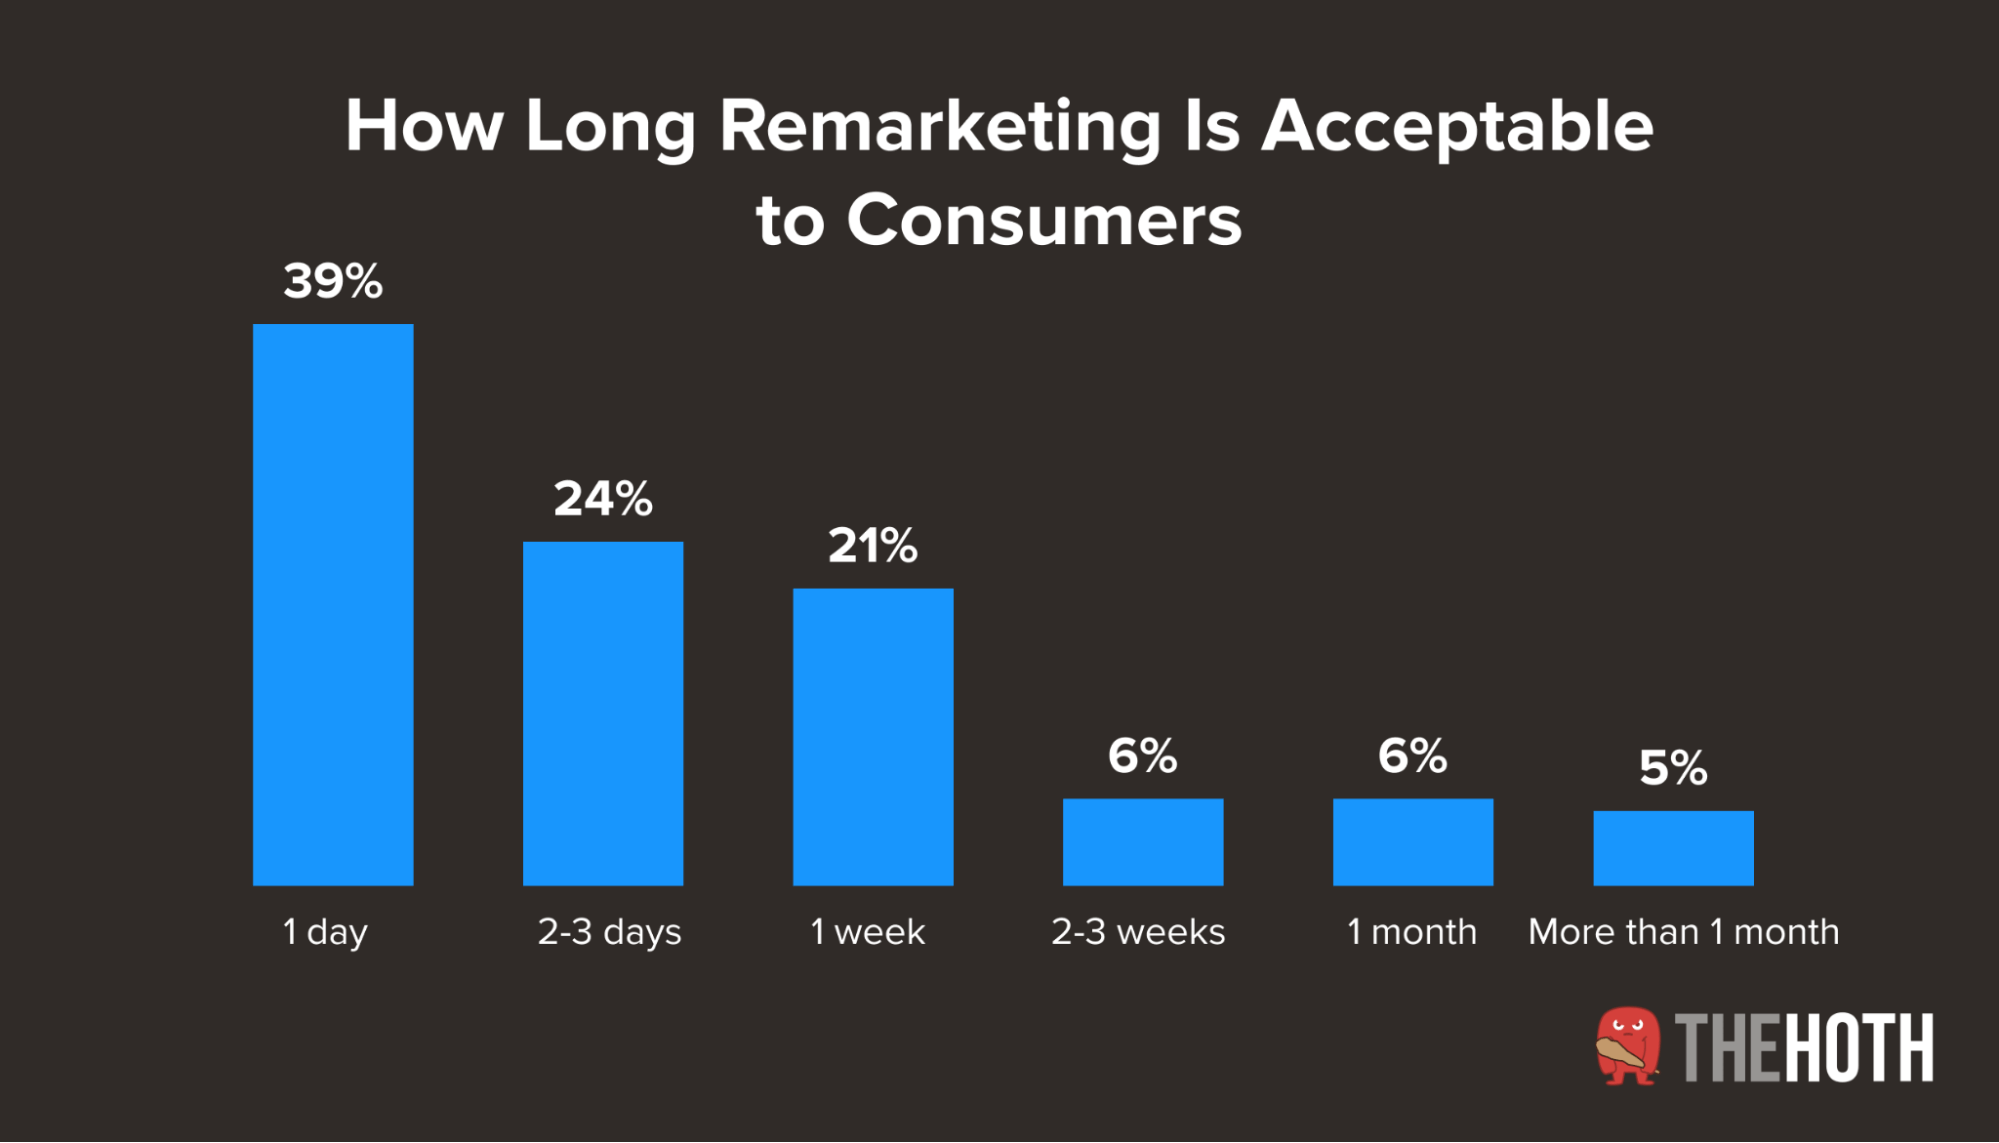 Graph from Marketing Charts Showing how often consumers are happy to see remarketing ads.